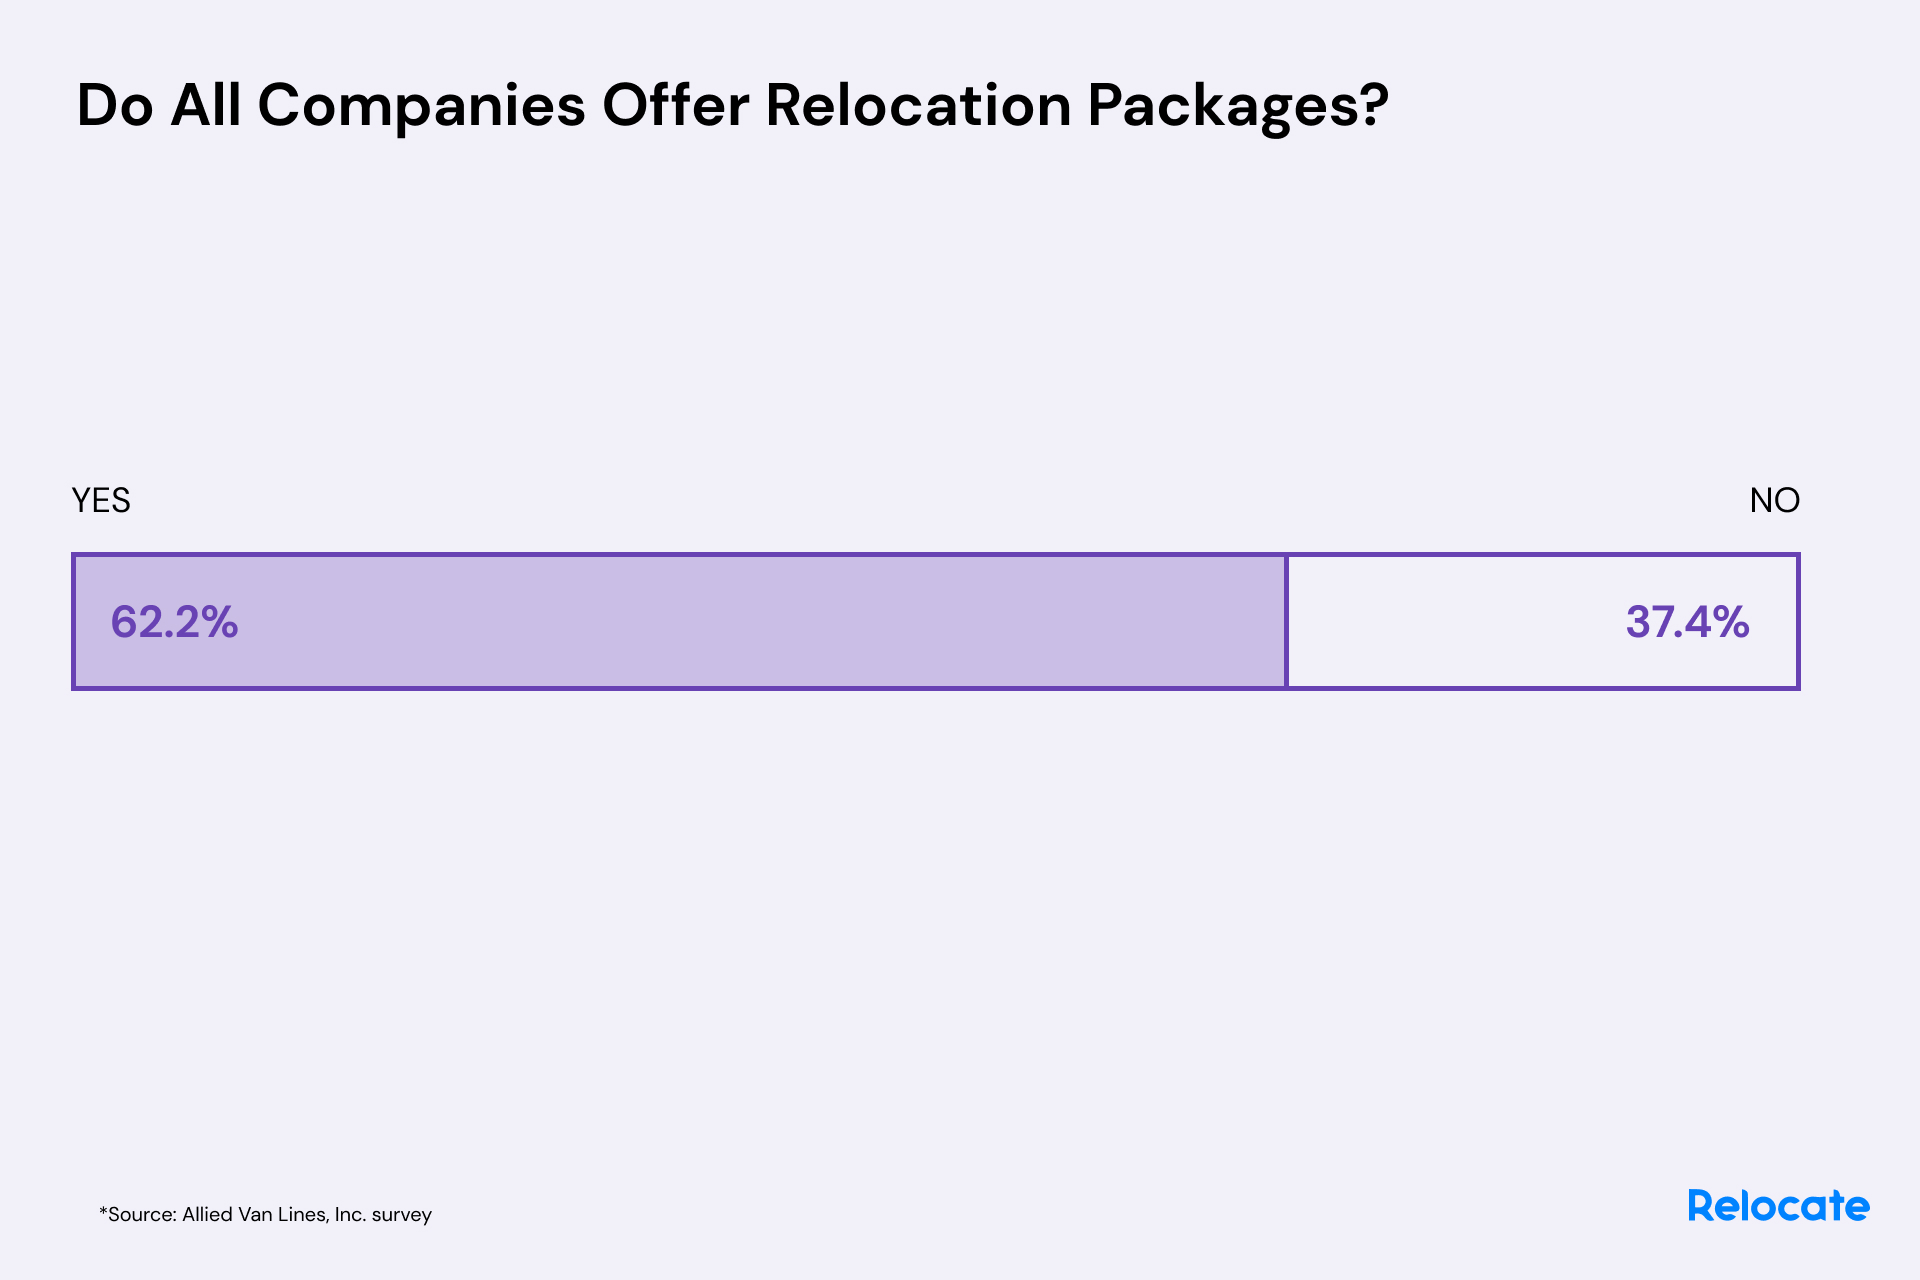 Percentage of companies that offer relocation packages